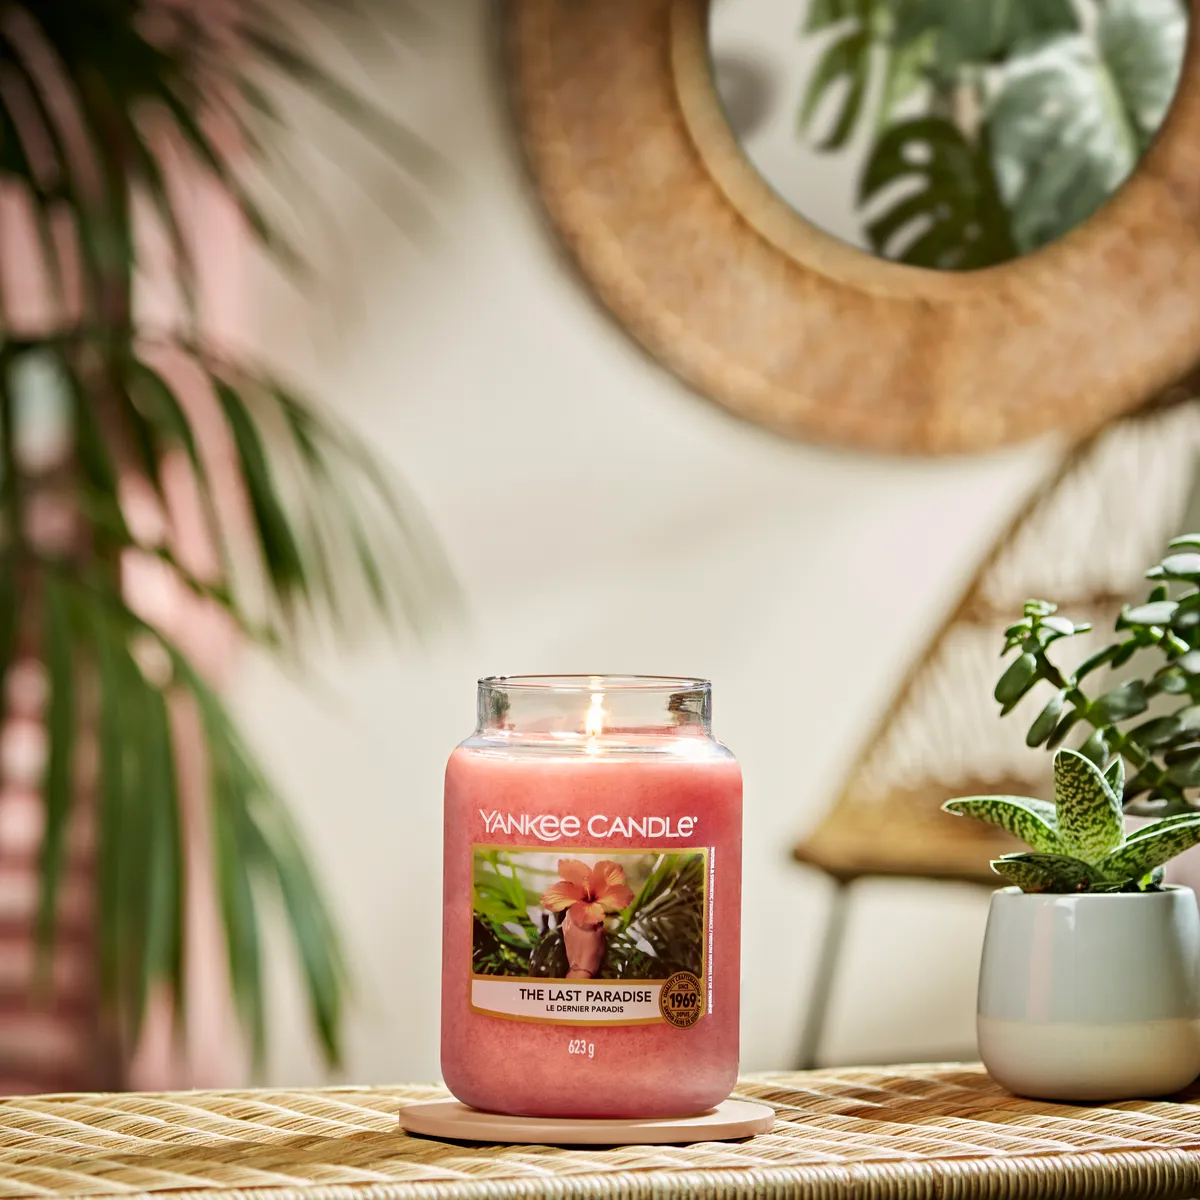 Best spring candles 2021 The Last Paradise, £20.99, Yankee Candle